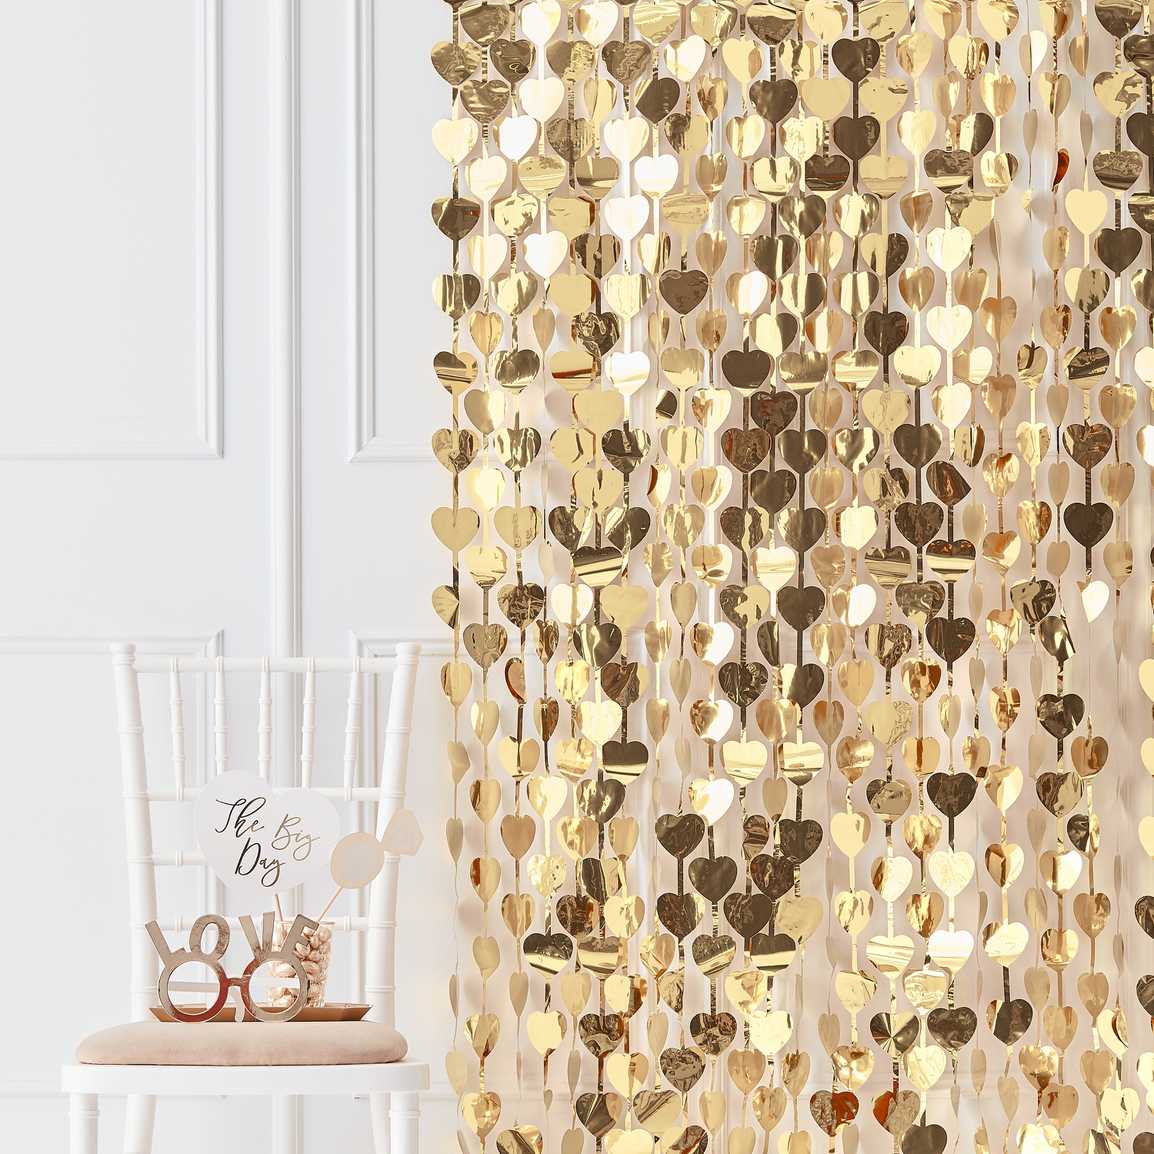 Curtain of golden hearts 1m x 2.5m